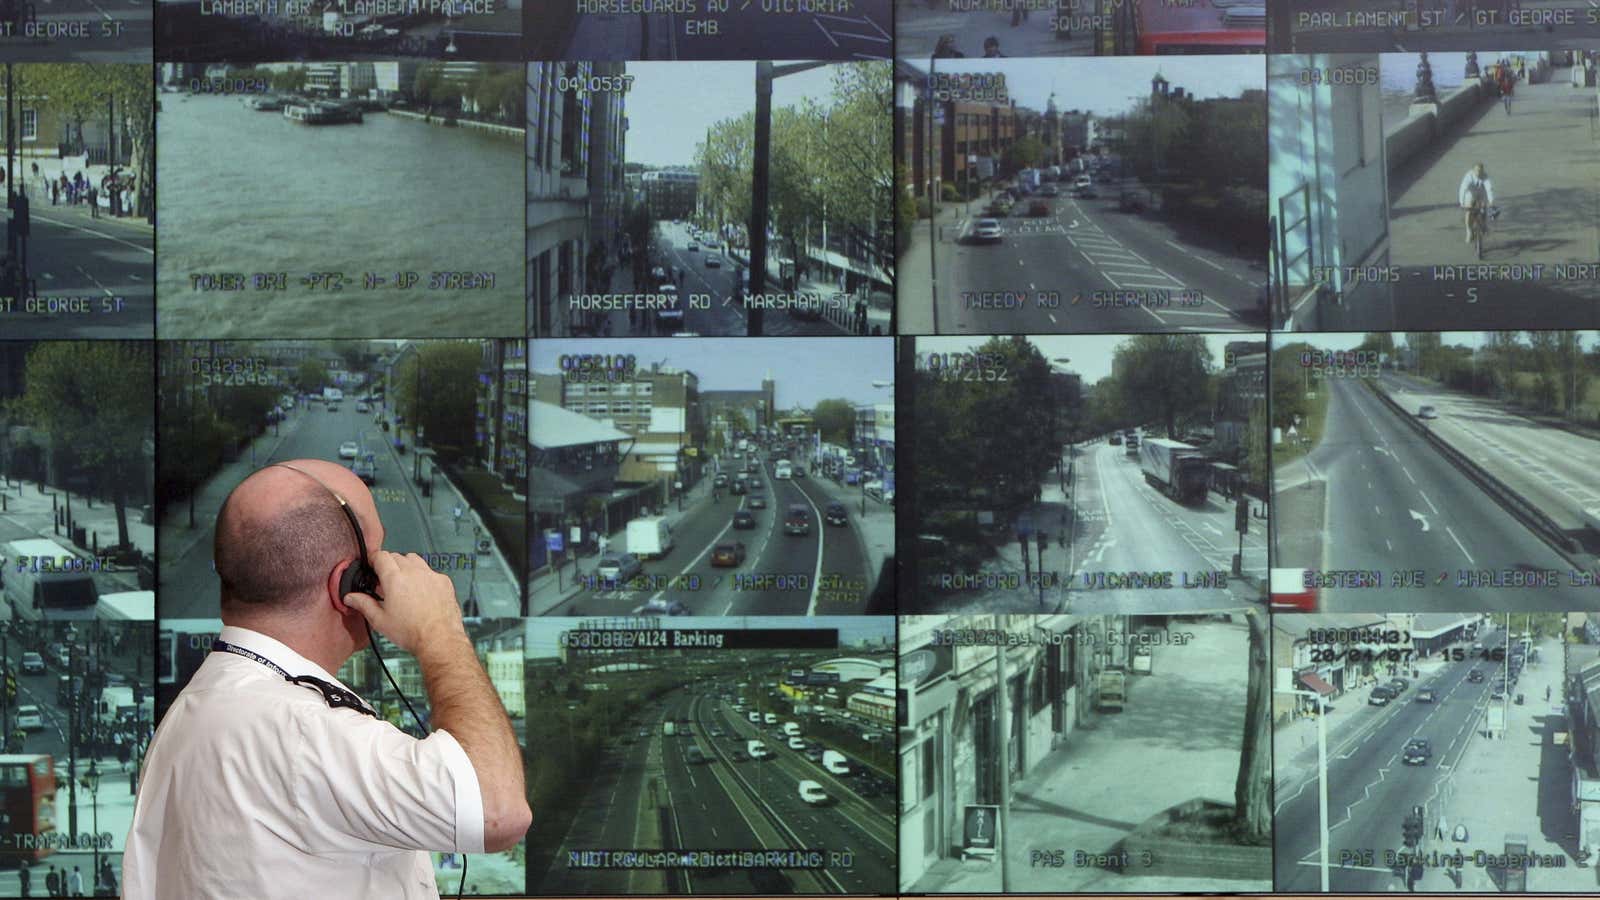 Human-controlled camera surveillance could just be the beginning.